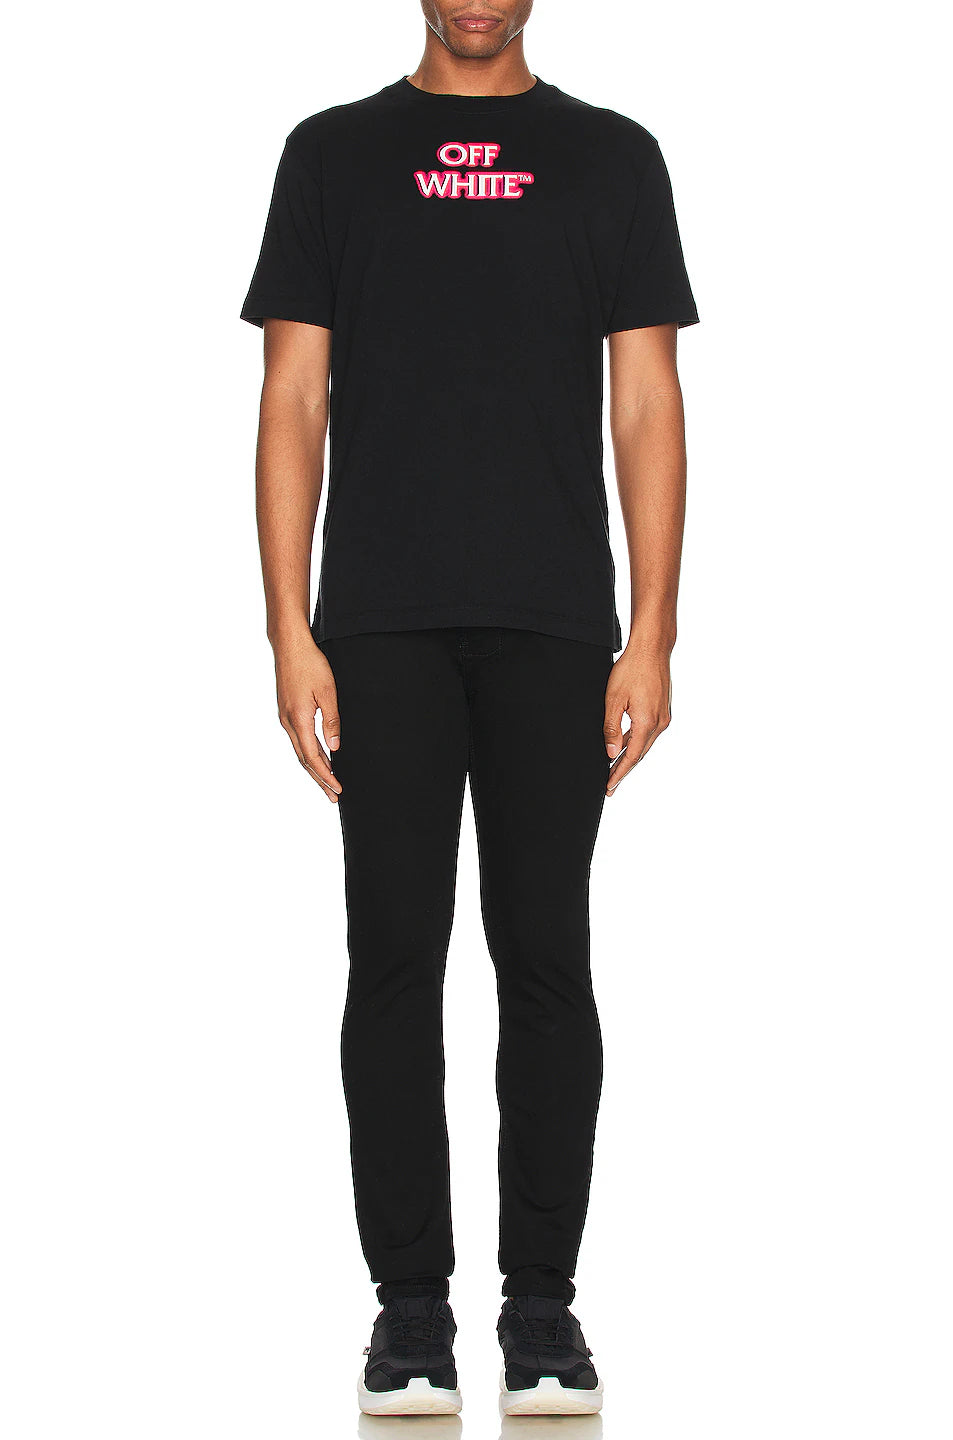 OFF WHITE  Black Branded T Shirt Veronique Luxury Collections